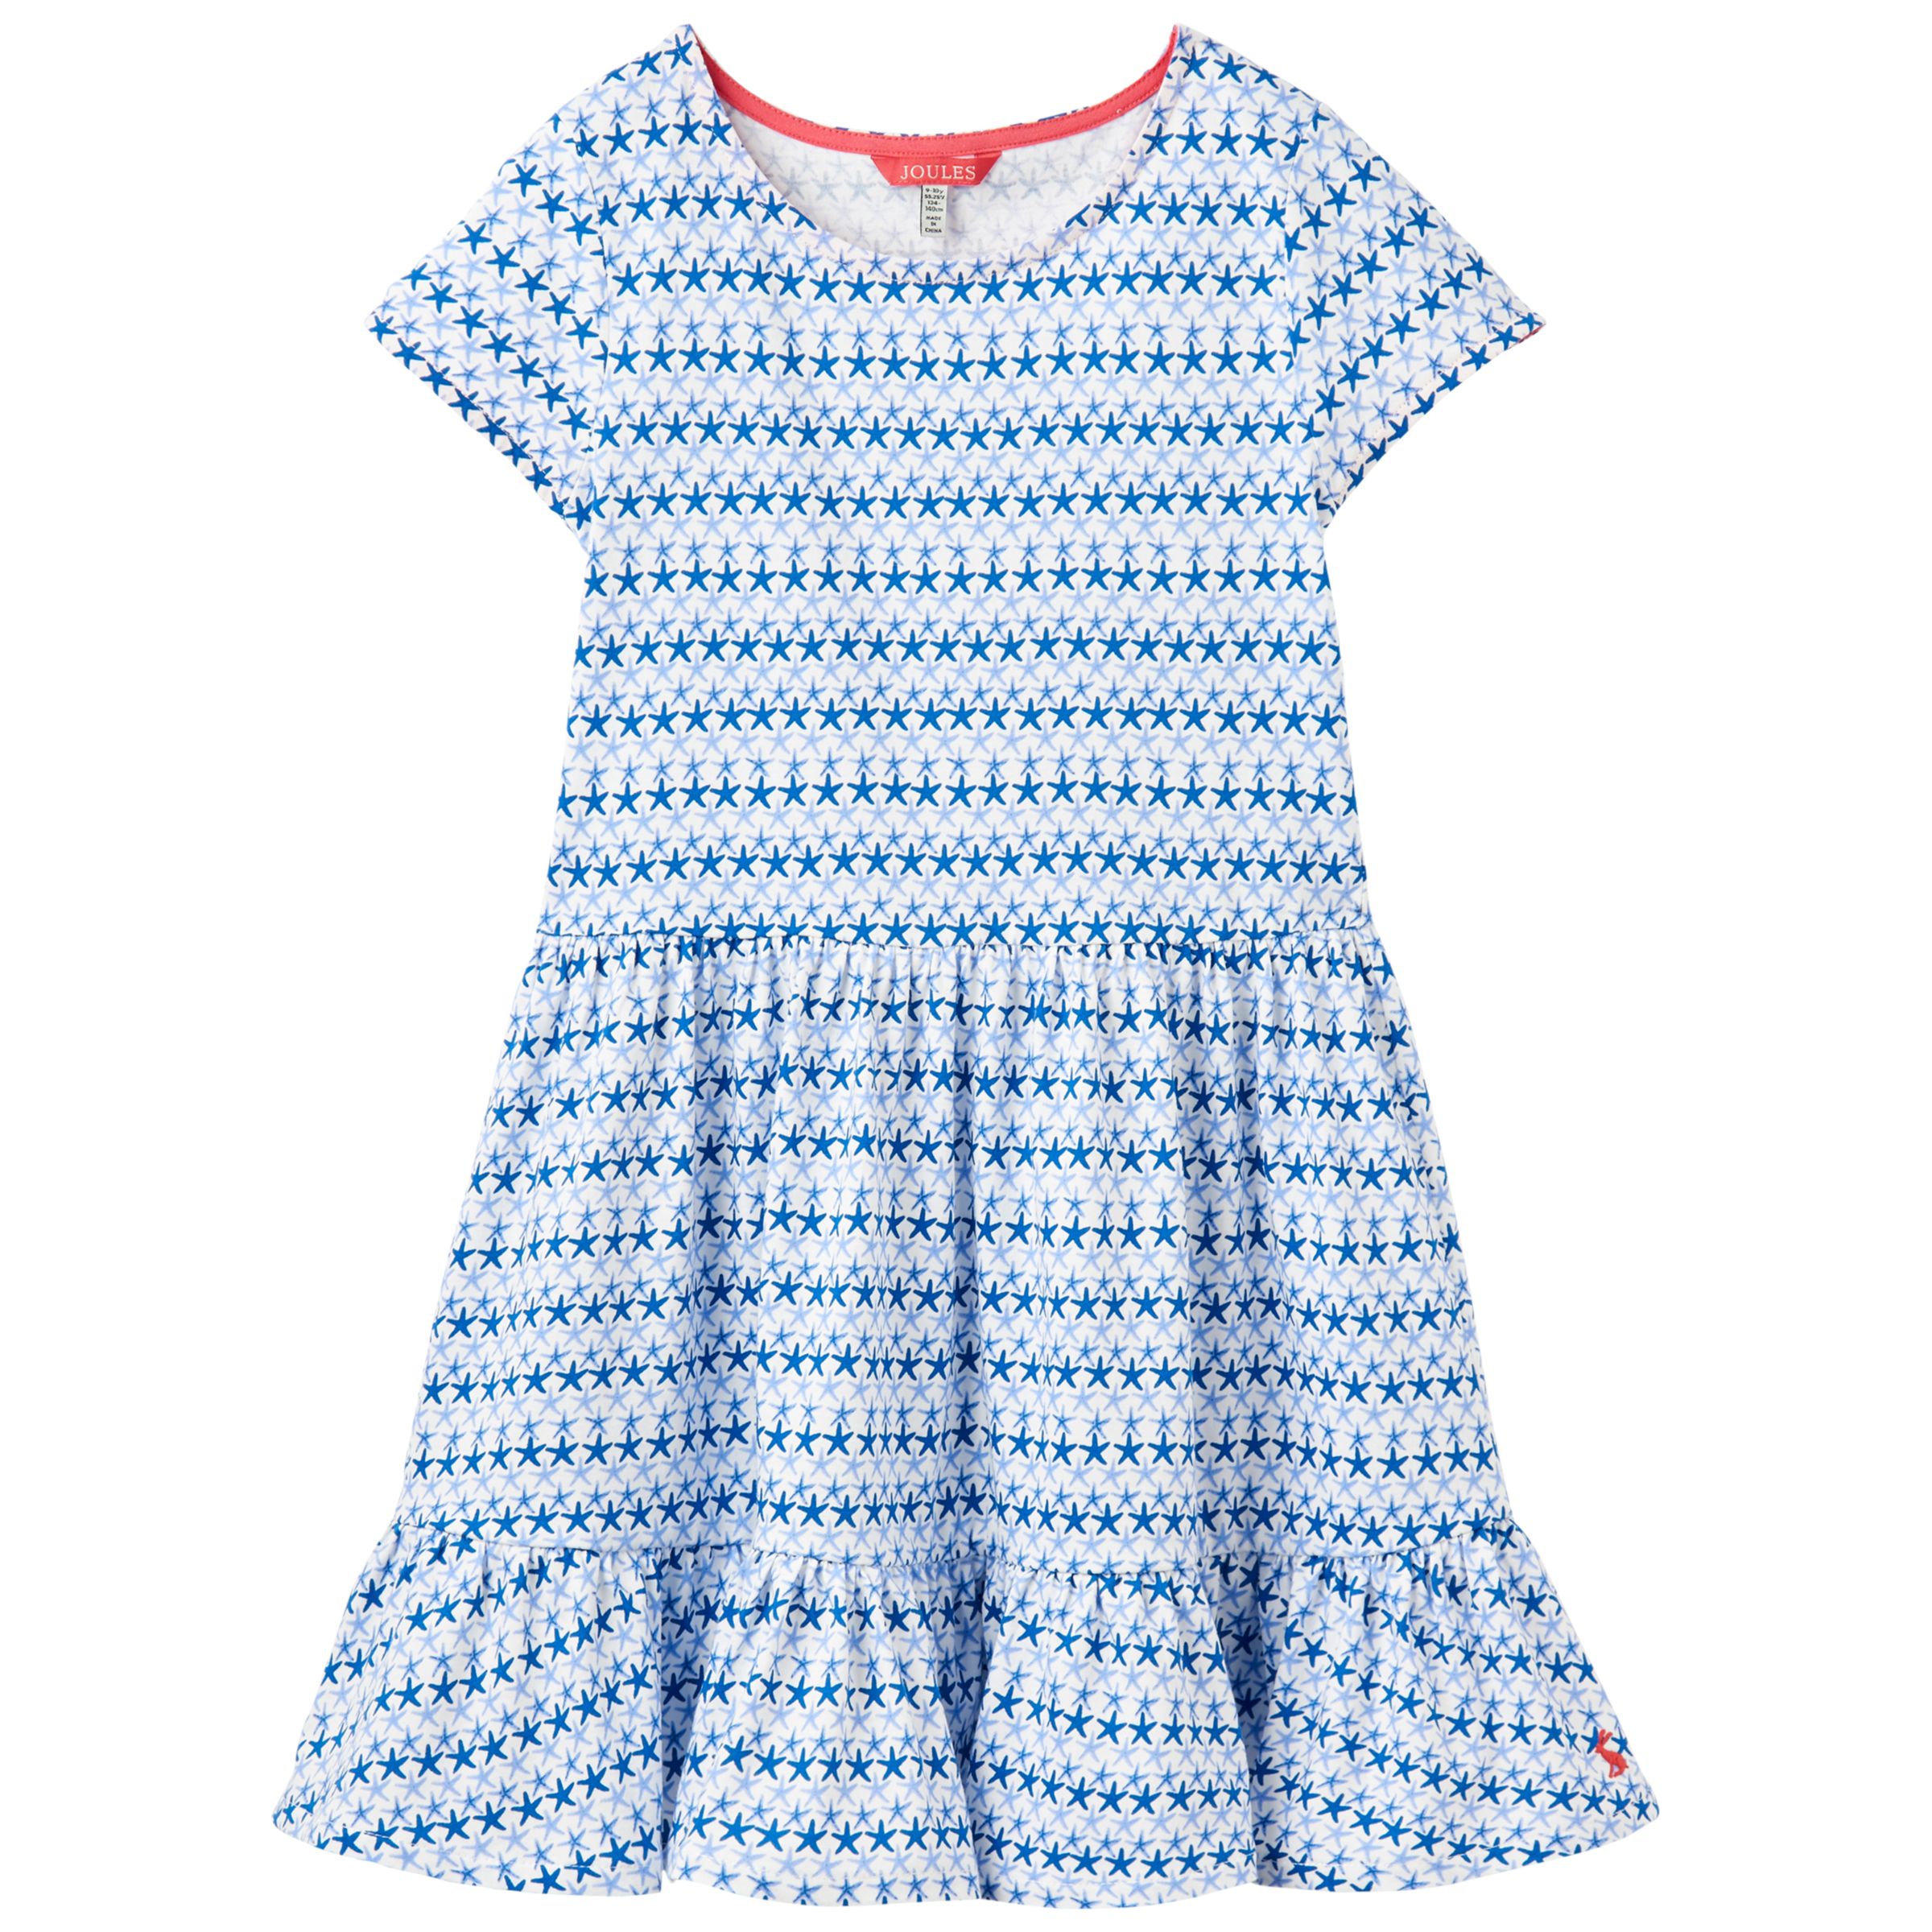 Joules Coco Starfish Dress in Blue.jpg